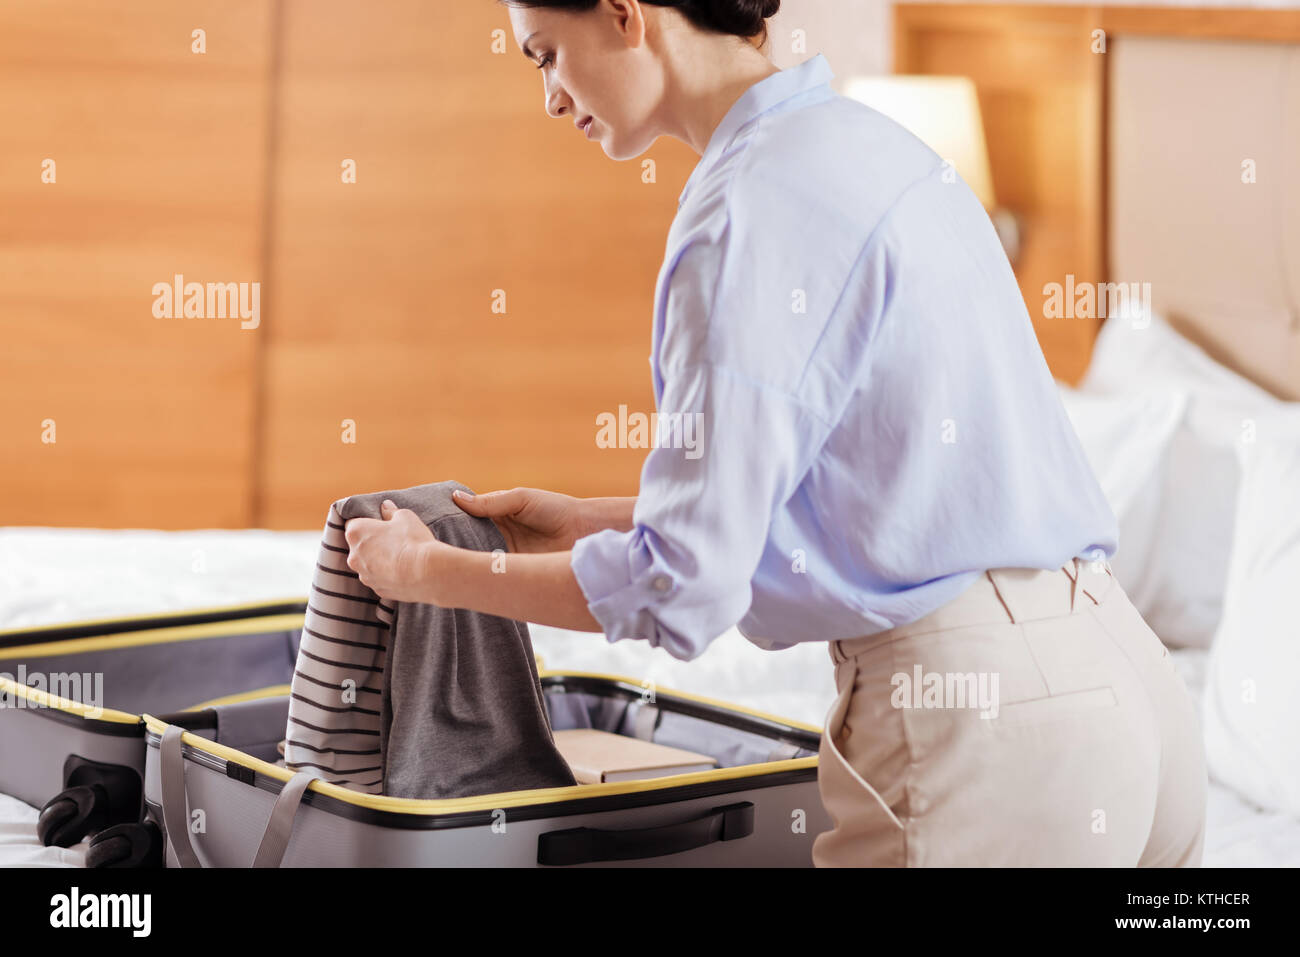 Earnest focused woman taking her clothes from luggage Stock Photo